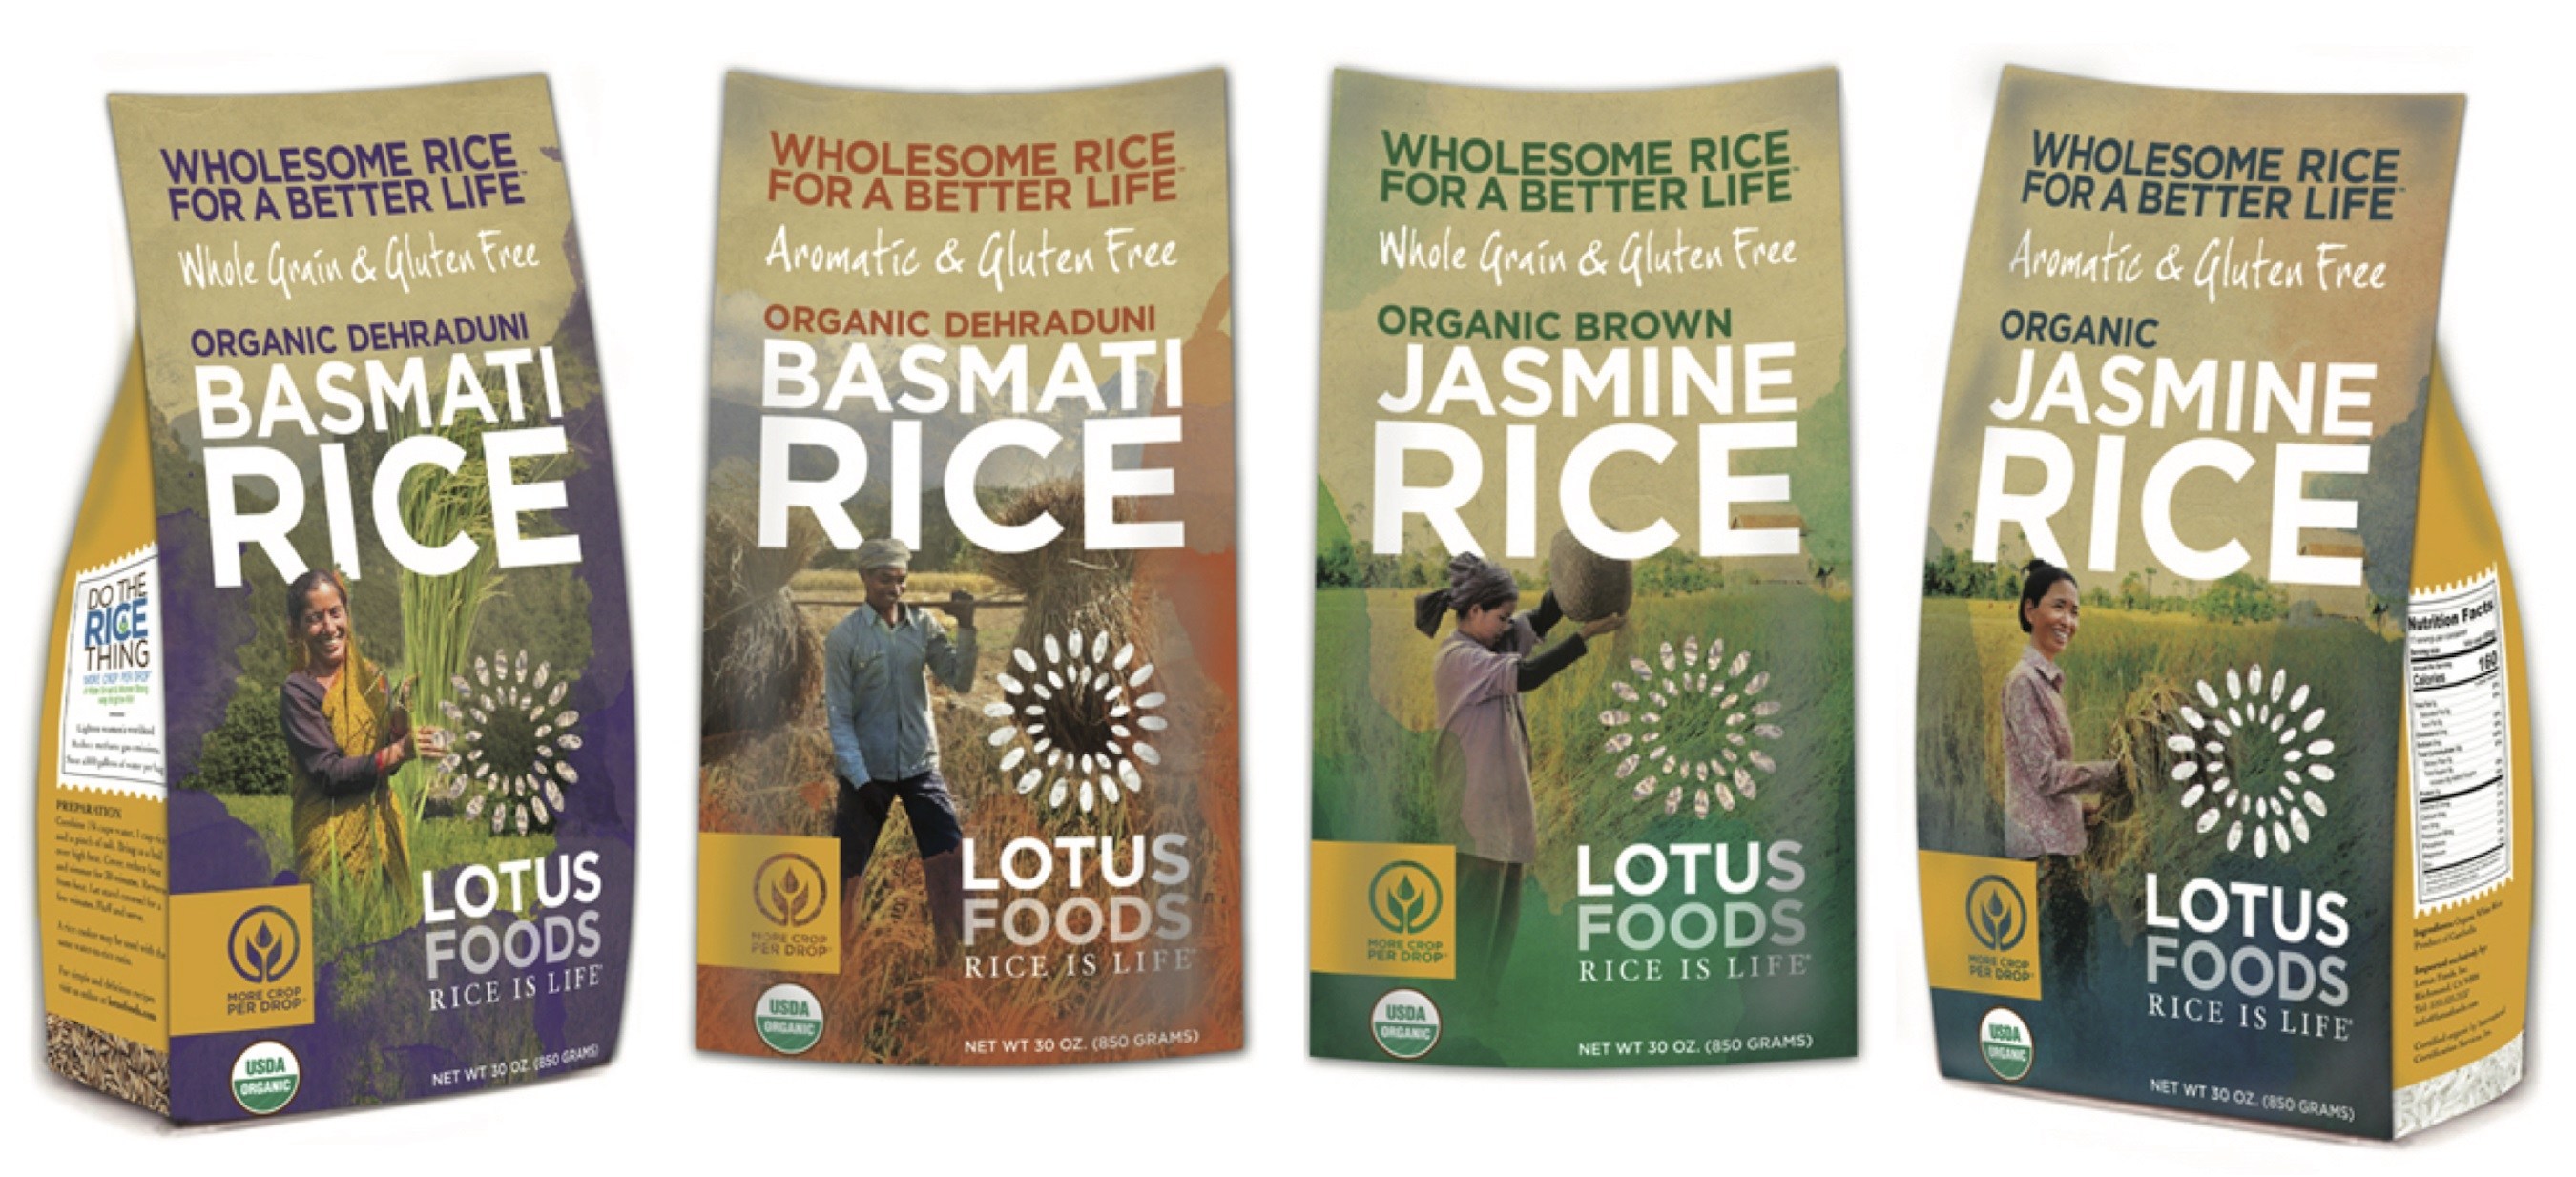 Lotus Foods Specialty Rice to Promote Climate- and Women-Smart Rice  Production